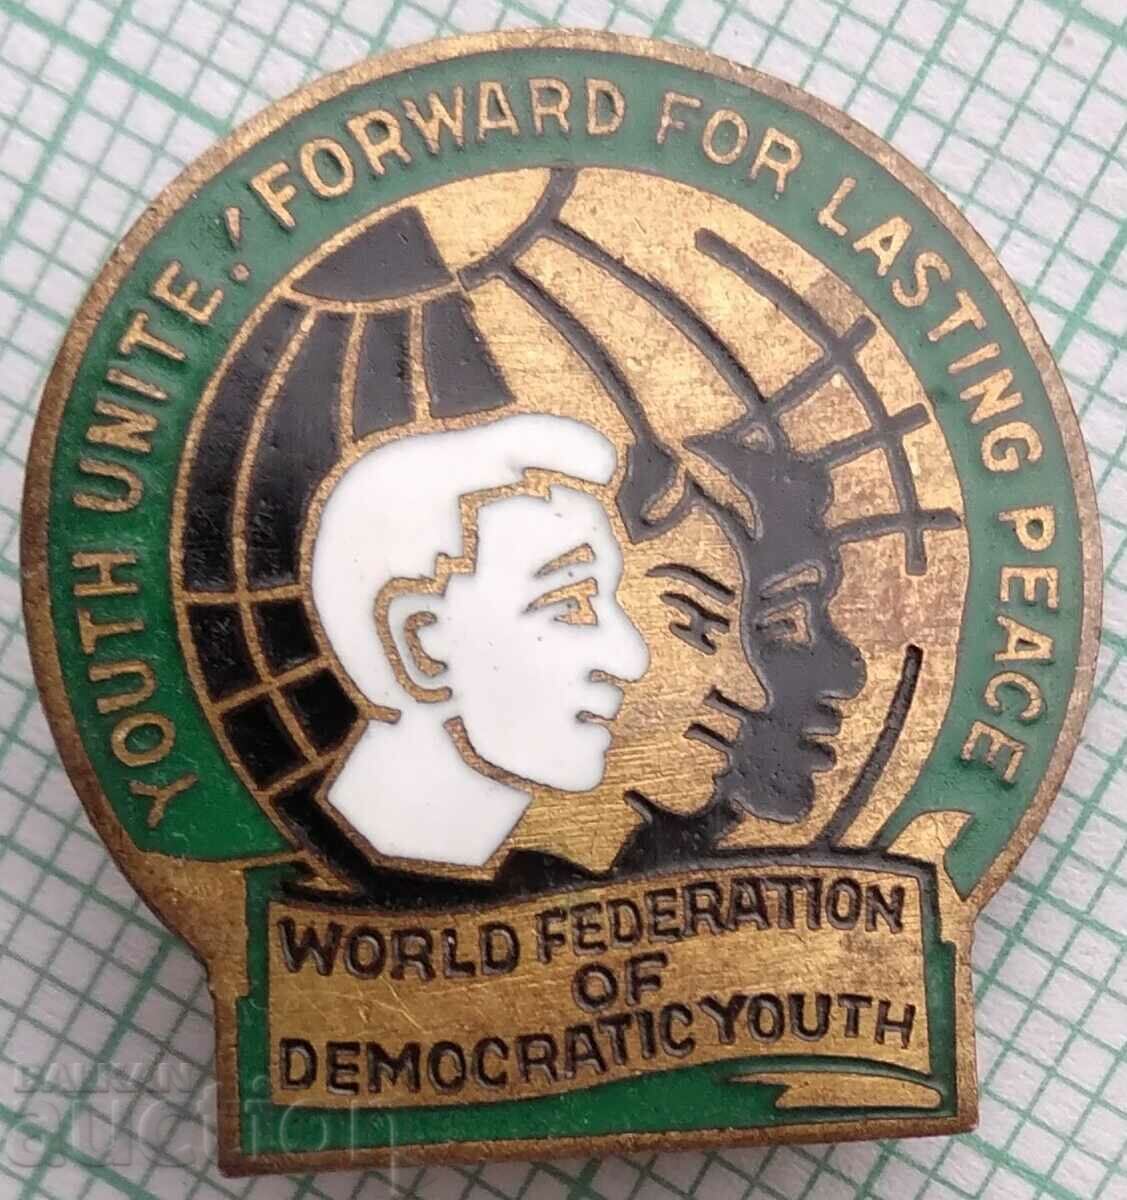 16314 WFDY World Federation of Democratic Youth